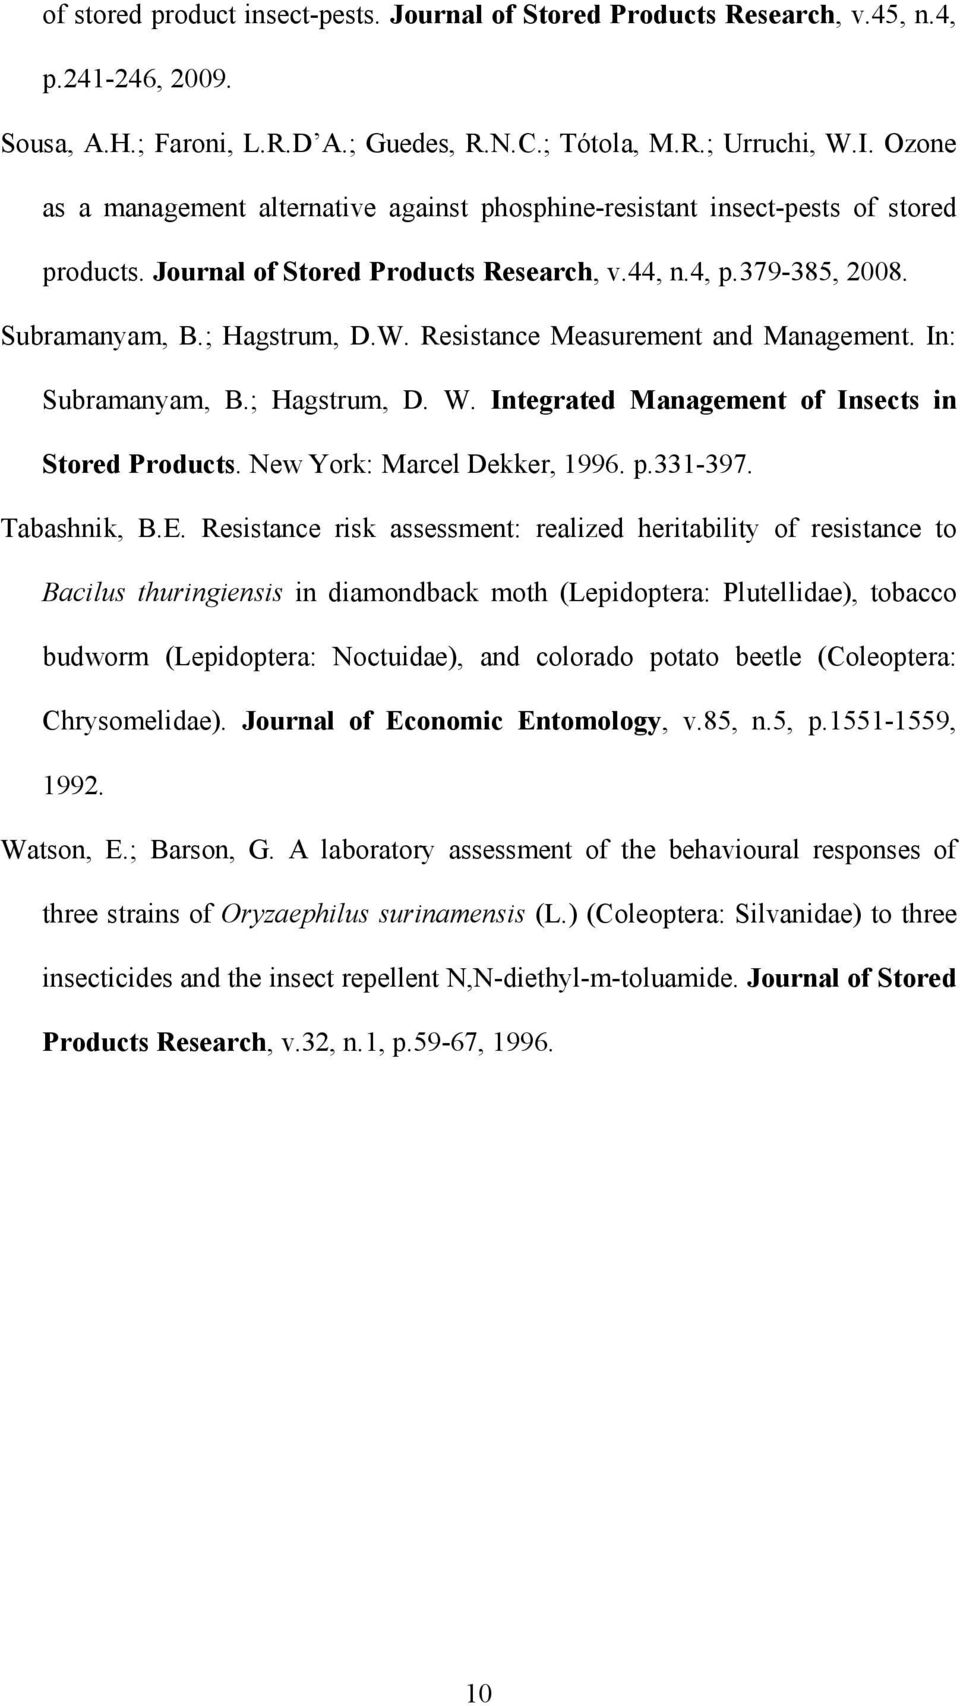 Resistance Measurement and Management. In: Subramanyam, B.; Hagstrum, D. W. Integrated Management of Insects in Stored Products. New York: Marcel Dekker, 1996. p.331-397. Tabashnik, B.E.